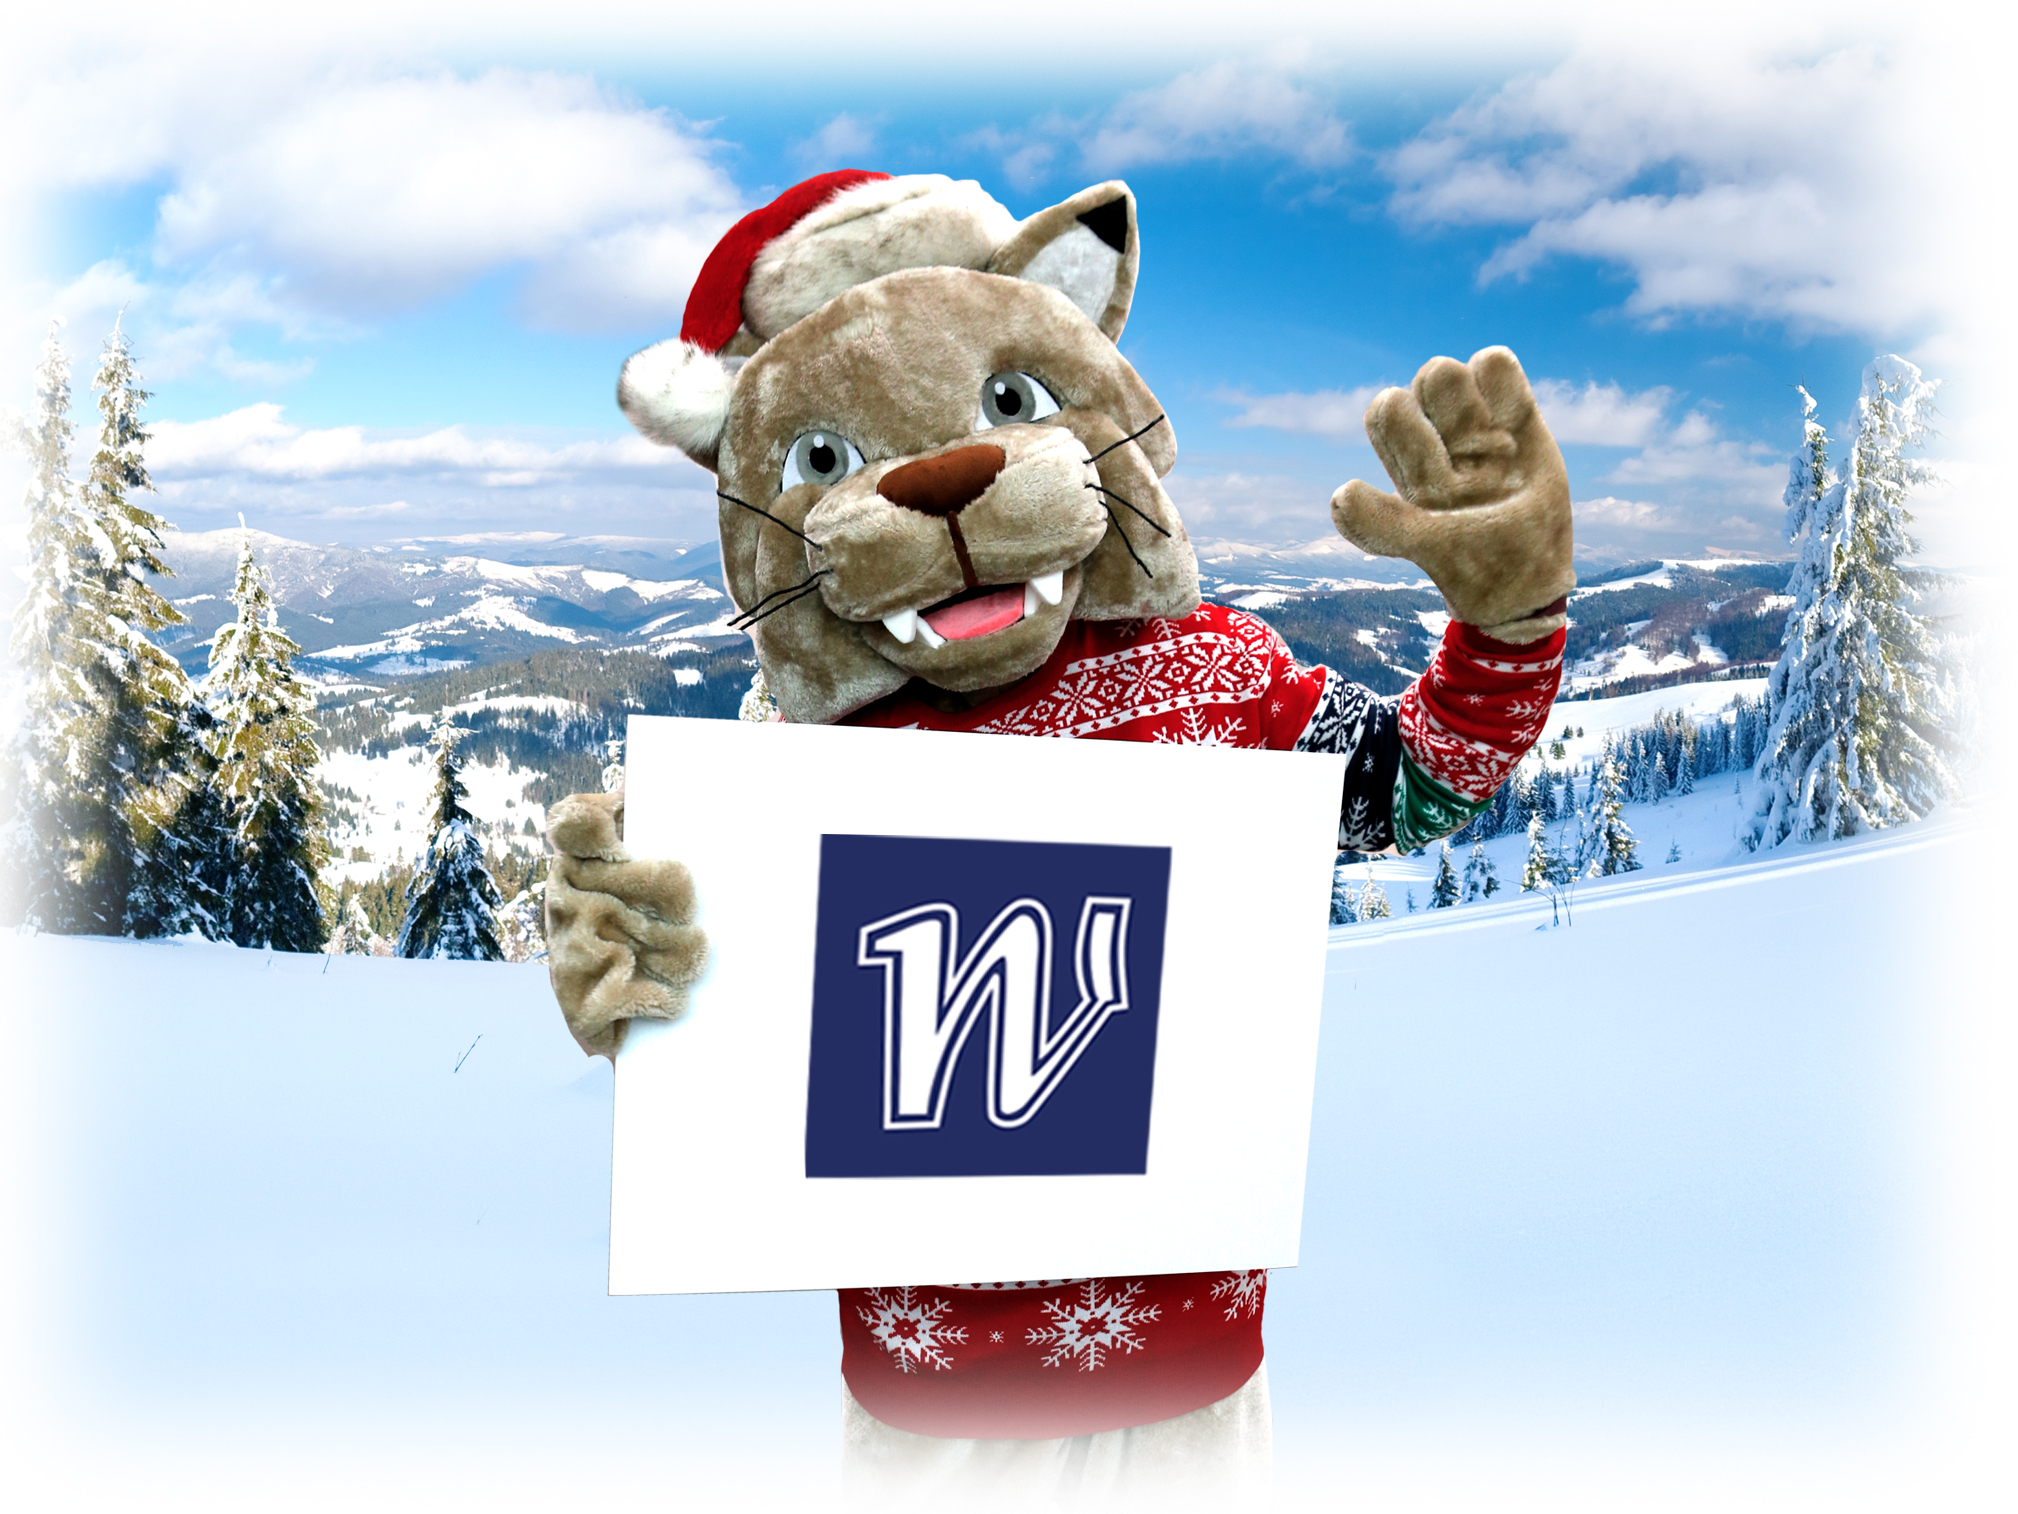 Willy encourages students to join him for 3-week and 5-week accelerated classes during the upcoming Winter Session.